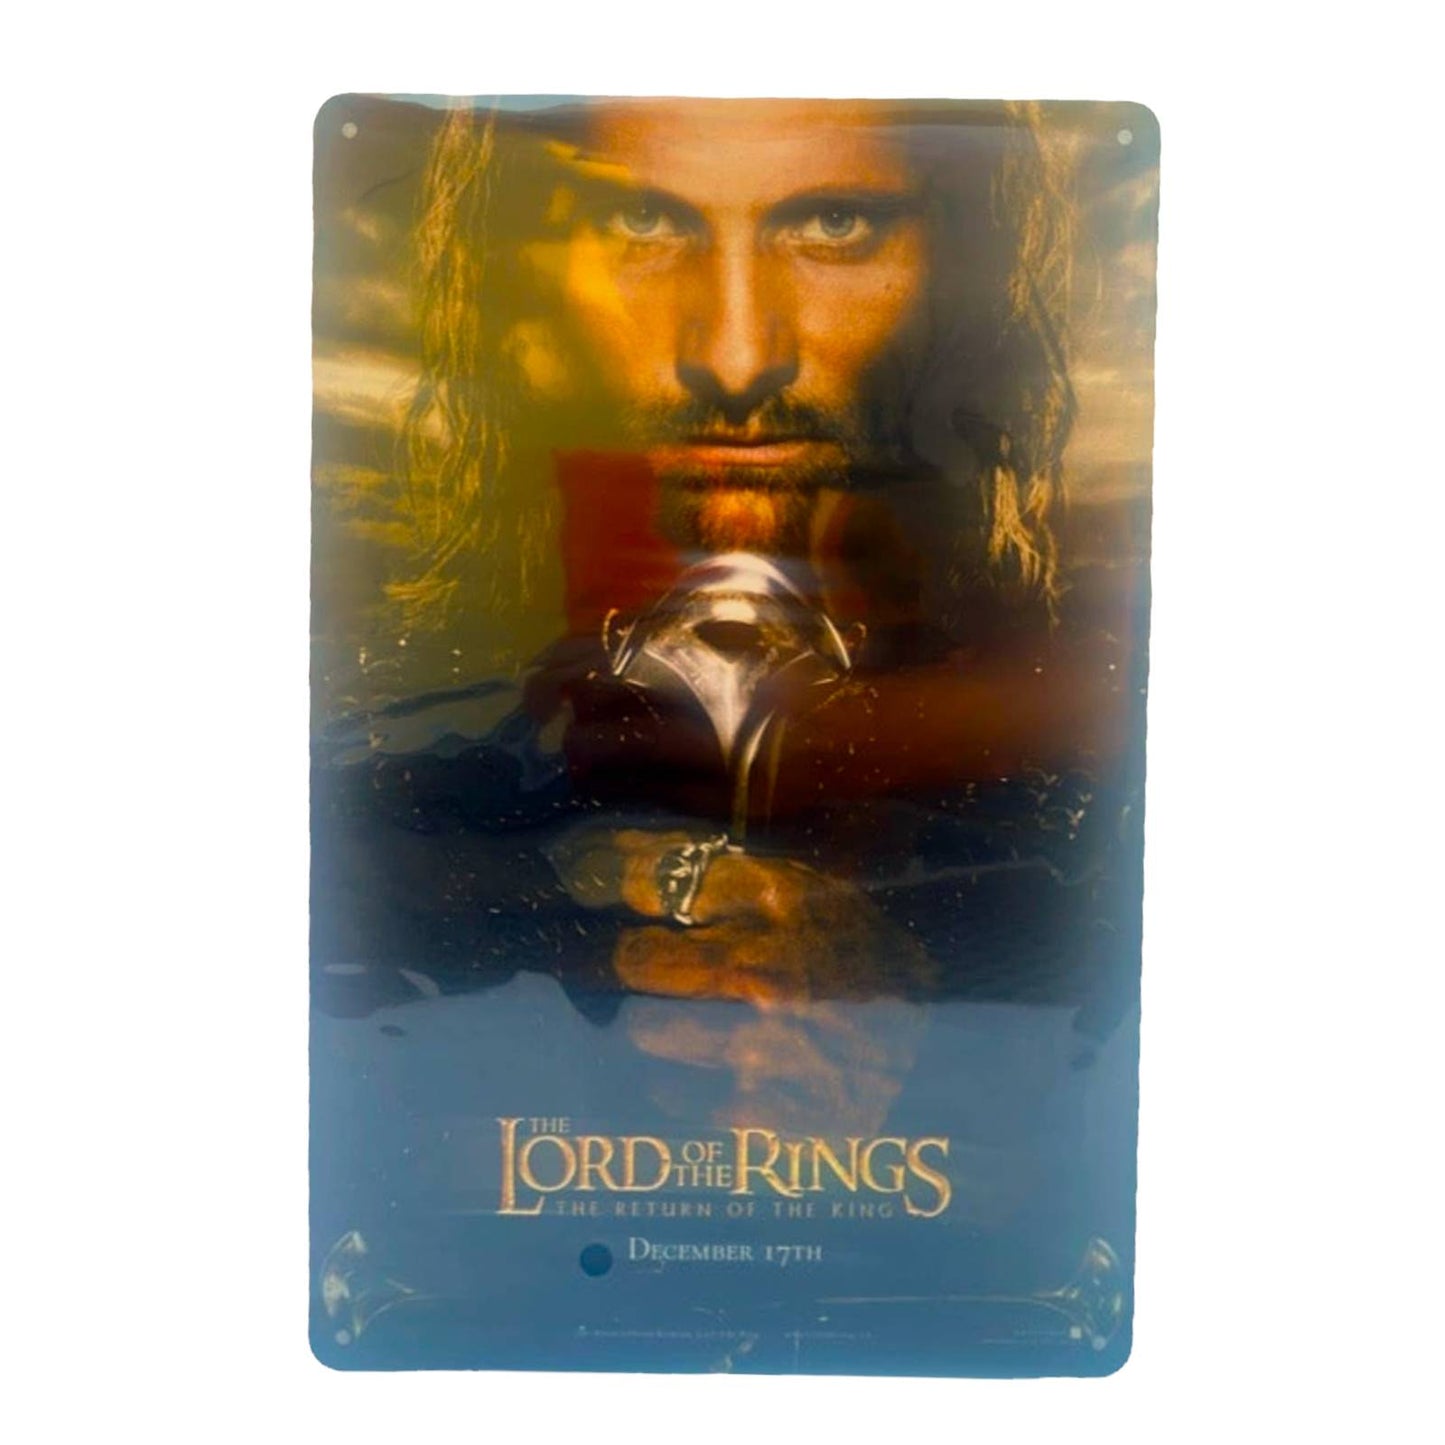 Lord Of The Rings Return Of The King Movie Poster Metal Tin Sign 8"x12"